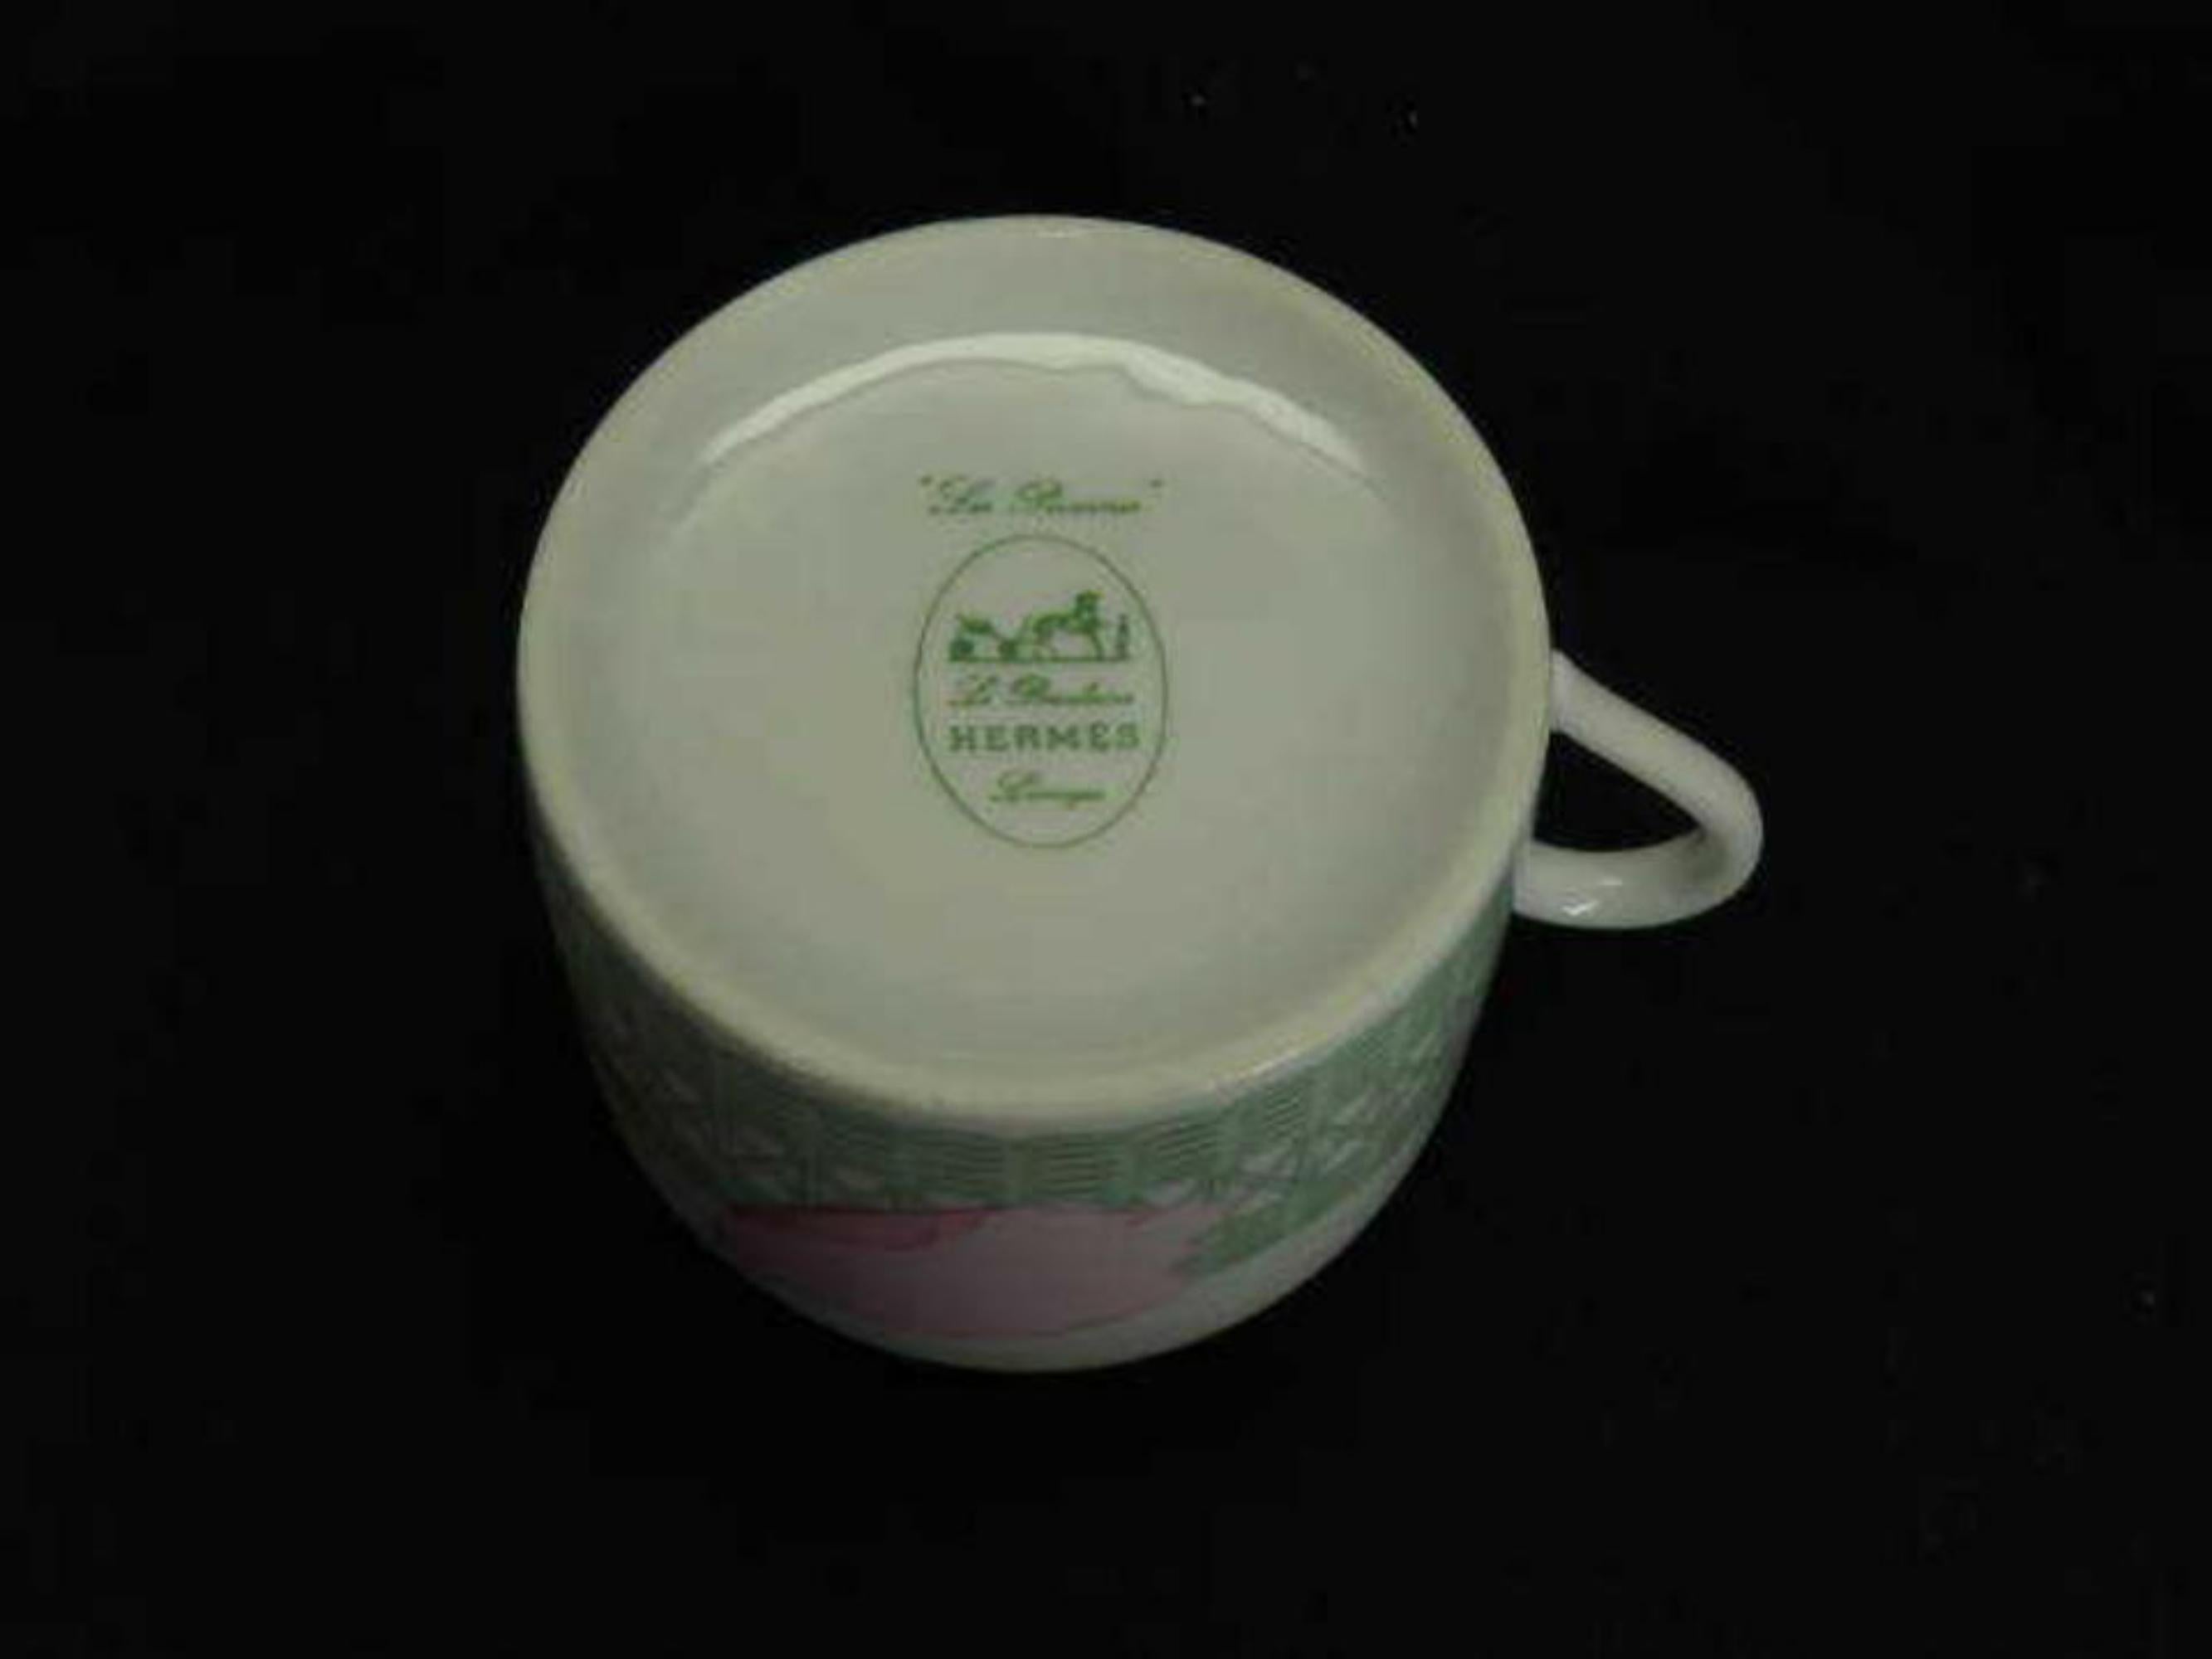 Hermès White Rare Limited Peony Les Pivoines Mug 233064 In Excellent Condition For Sale In Forest Hills, NY